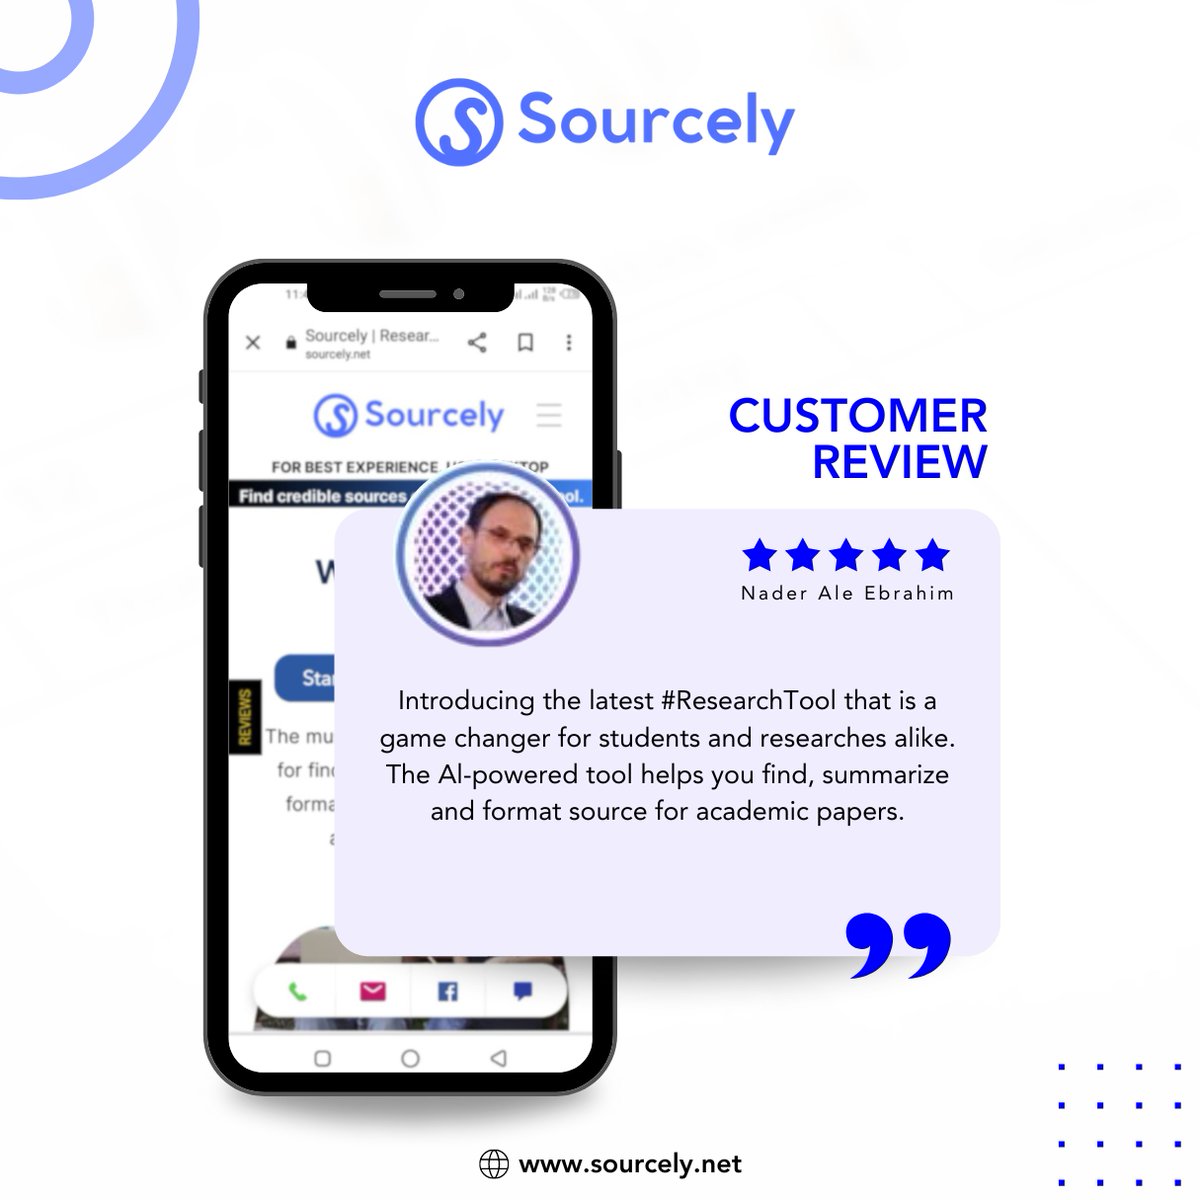 Uncover firsthand experiences from our users! Genuine stories, genuine impact.
#Testimonials #HappyCustomers #SourcelyAdvantage #AIWritingTool #ResearchSimplified #sourcely #aitool #writingprompts